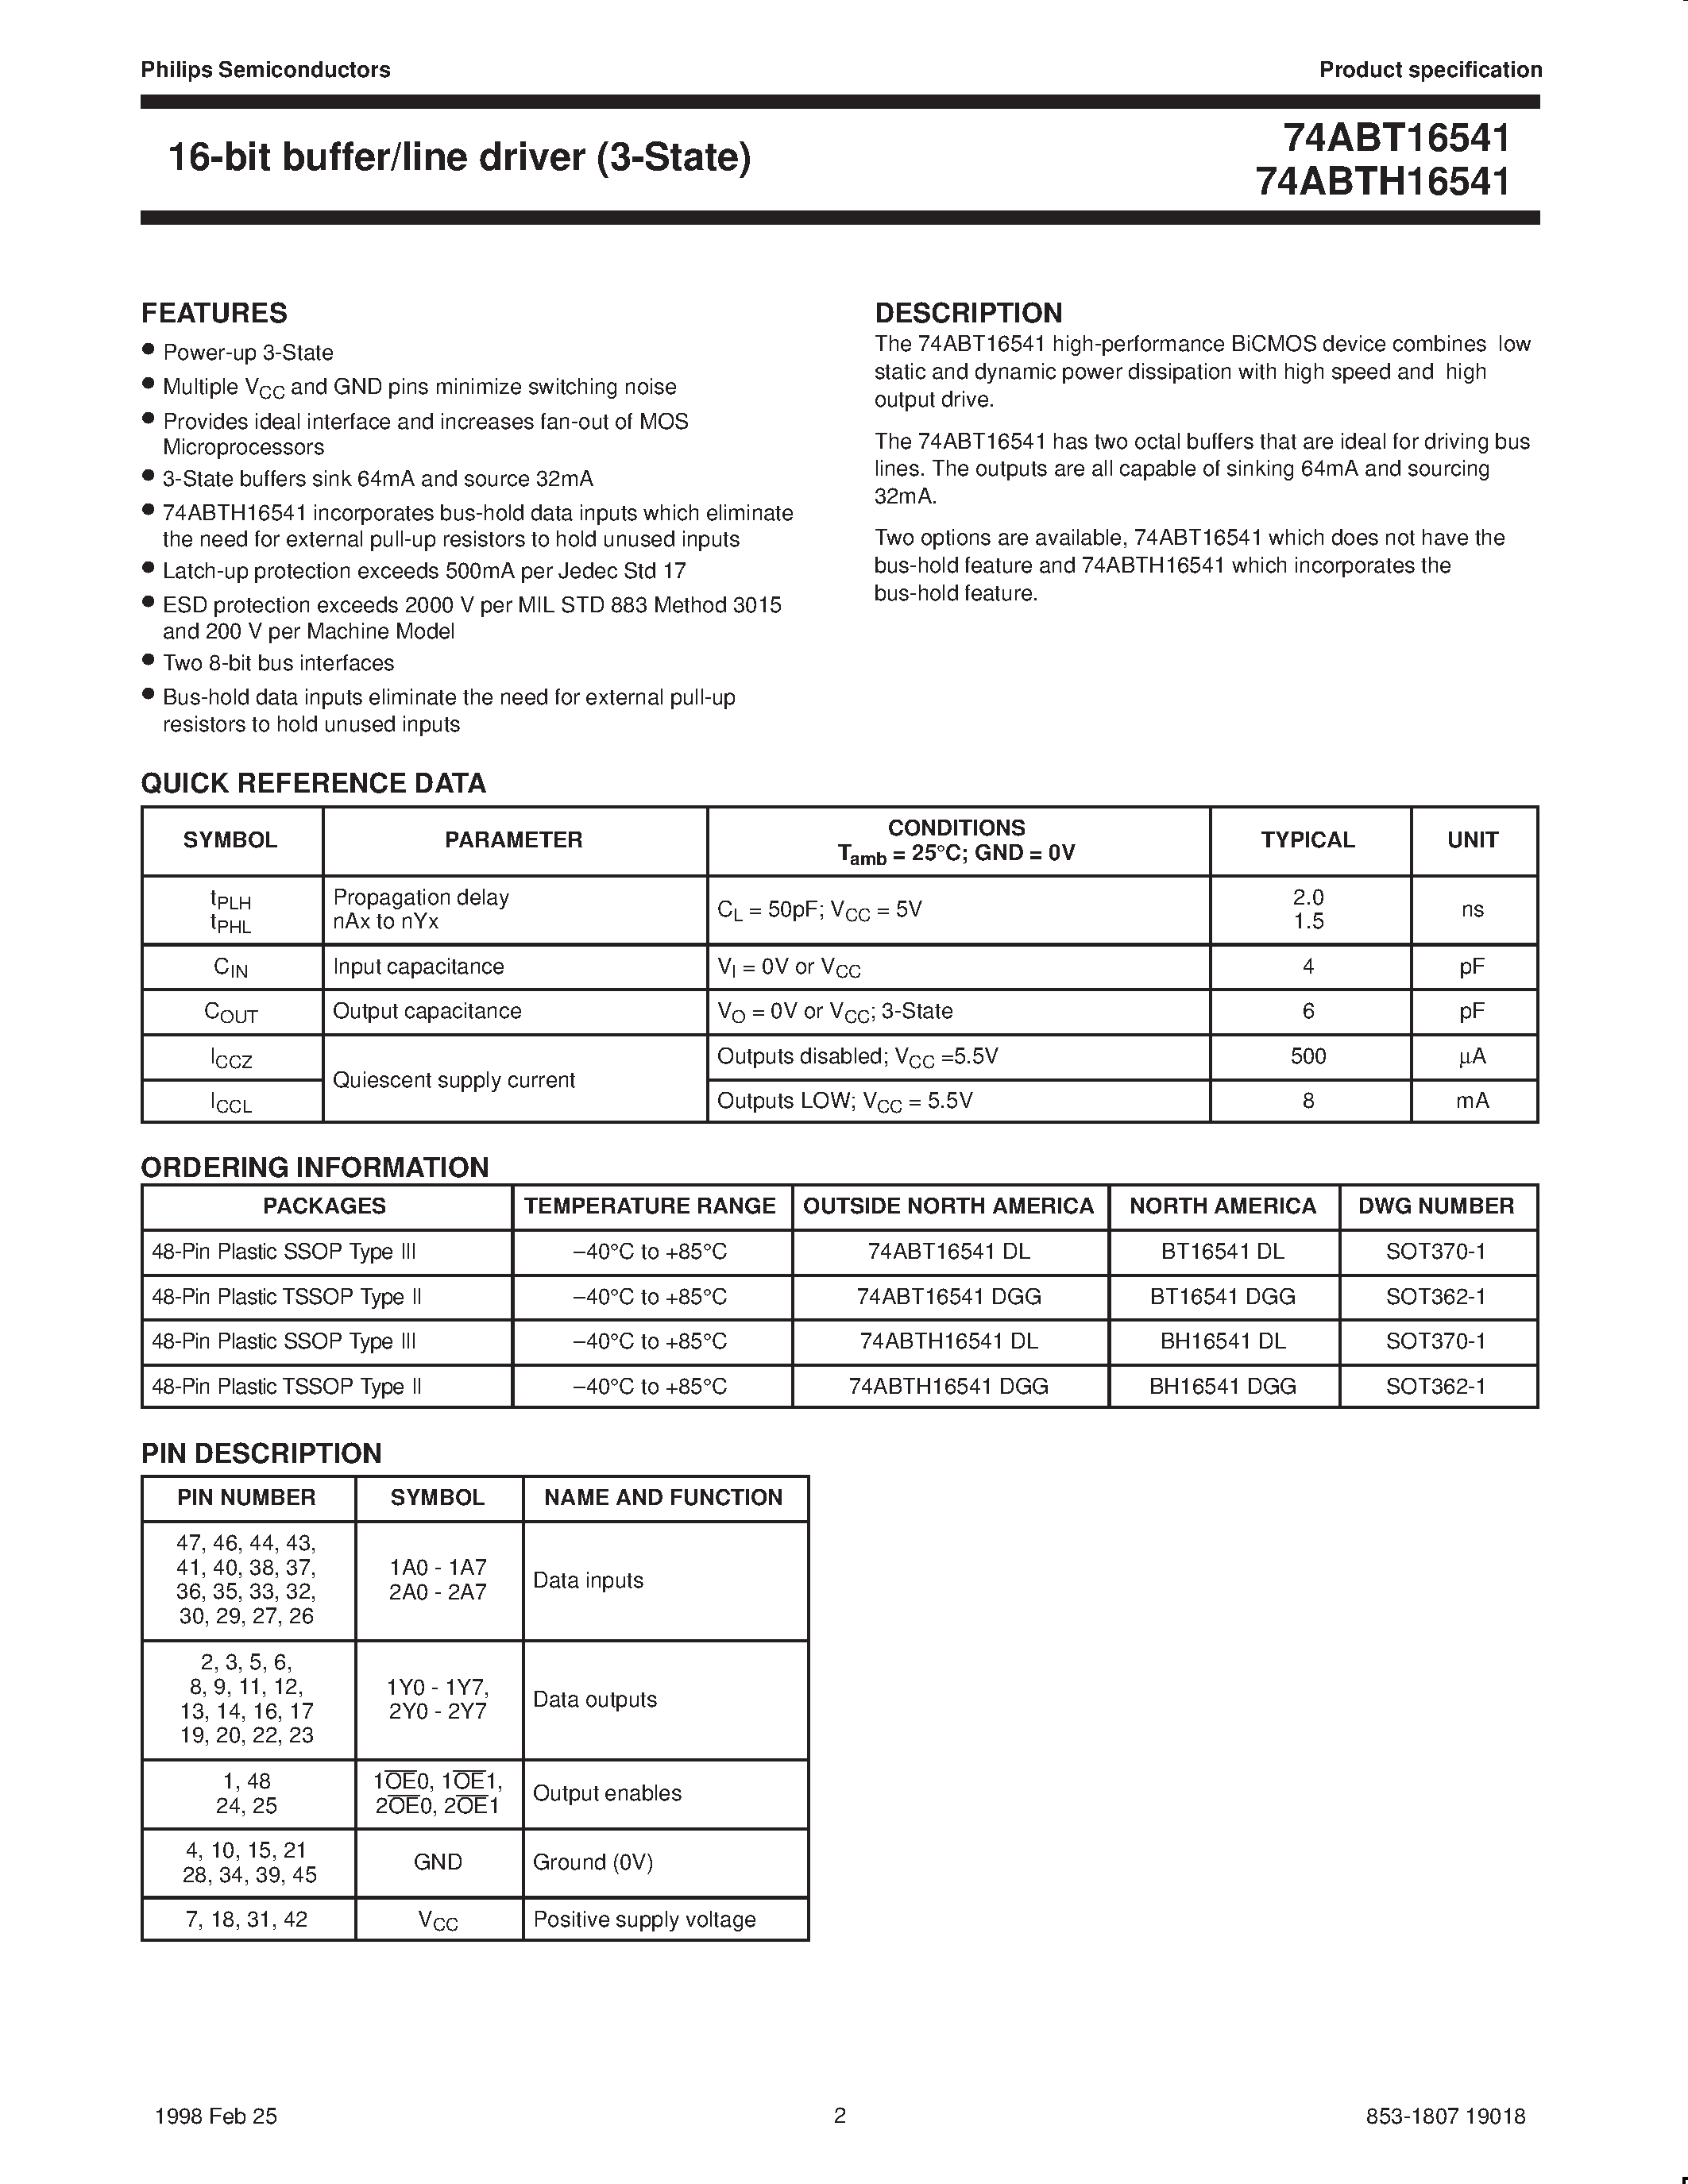 Datasheet 74ABTH16541DGG - 16-bit buffer/line driver 3-State page 2